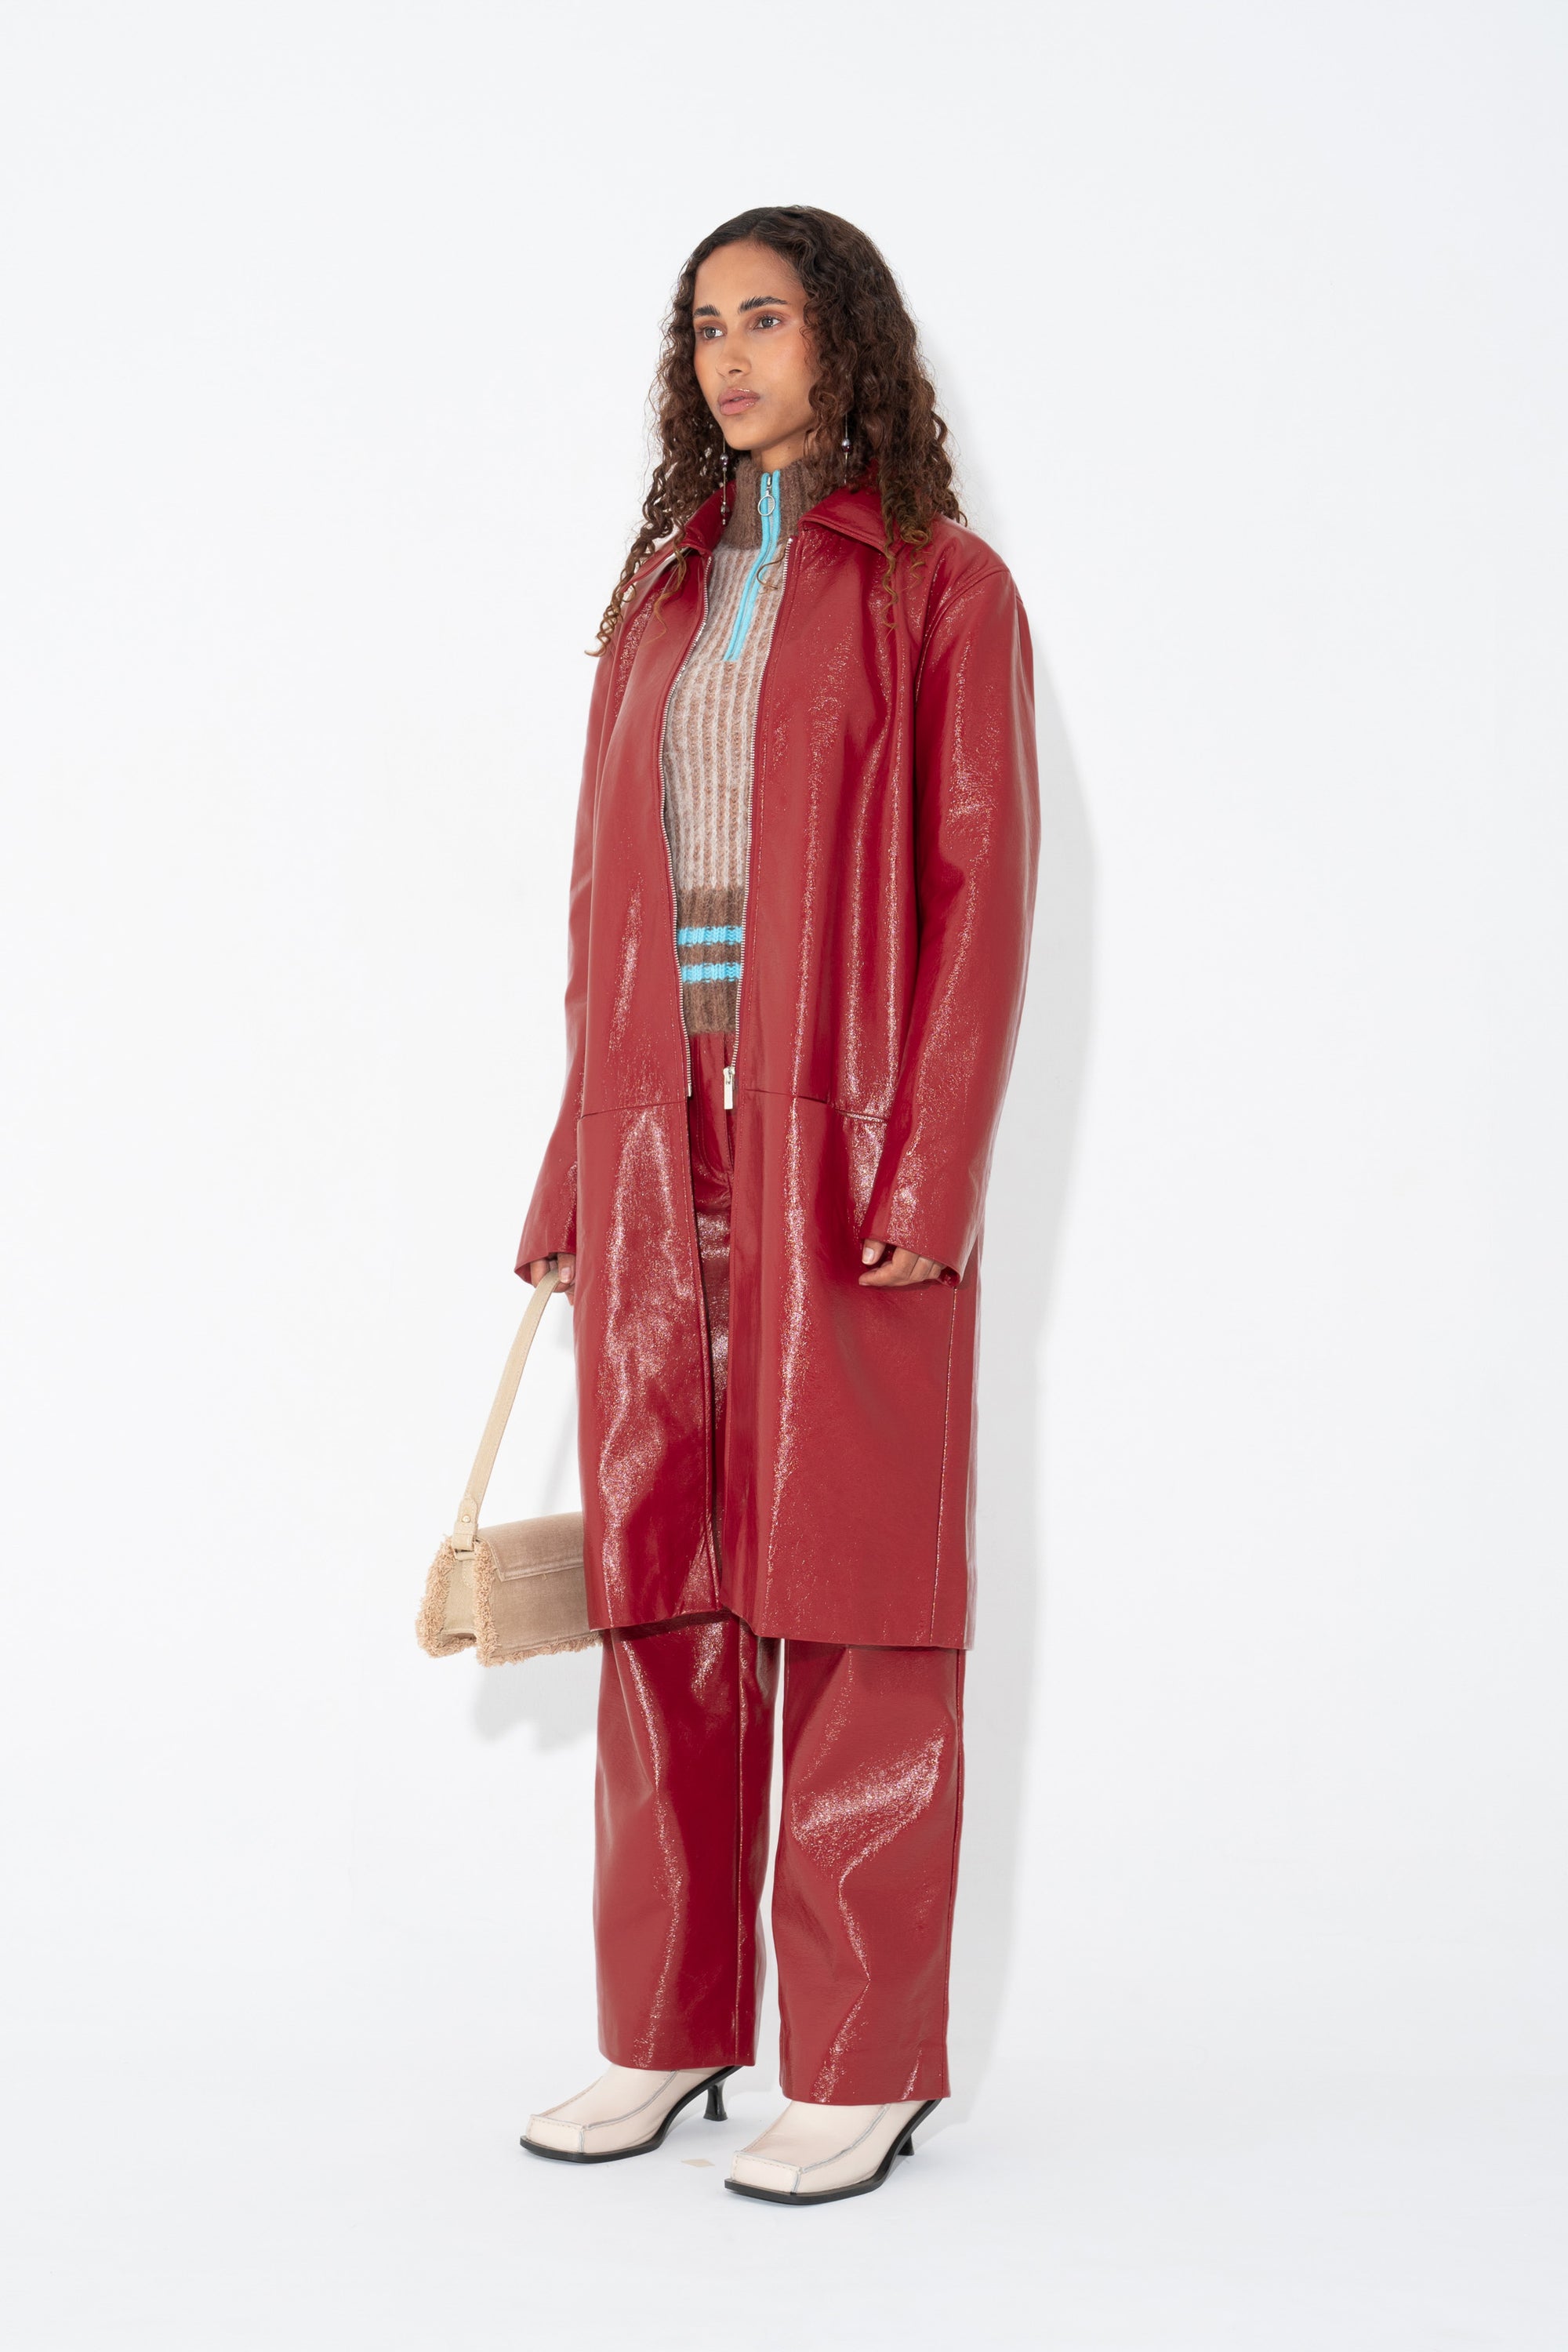 Arthur Apparel Oversized Red Patent Leather Coat